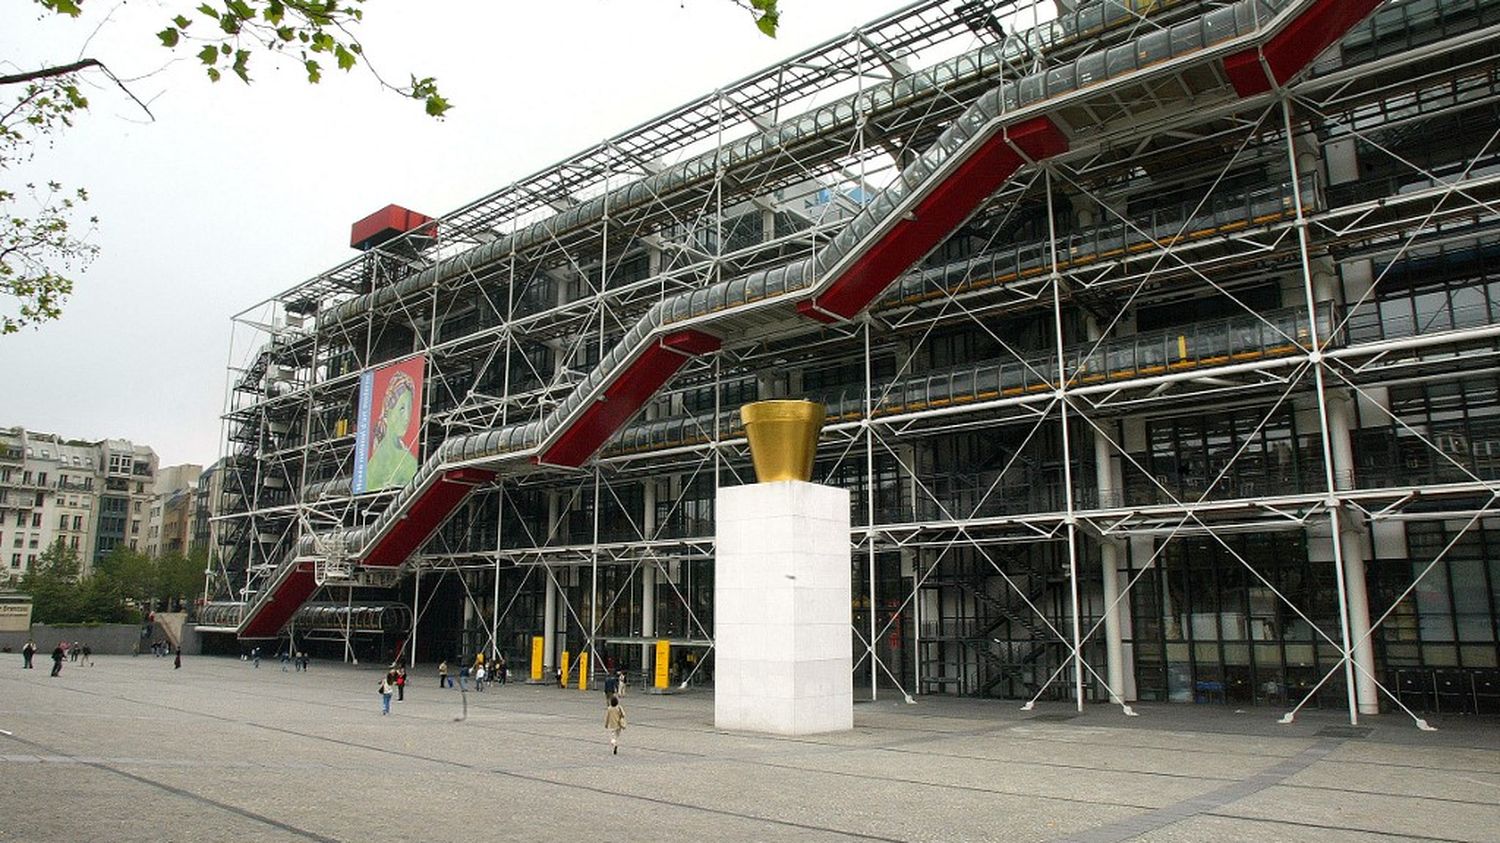 The Court of Auditors strongly criticizes the Center Pompidou in its report